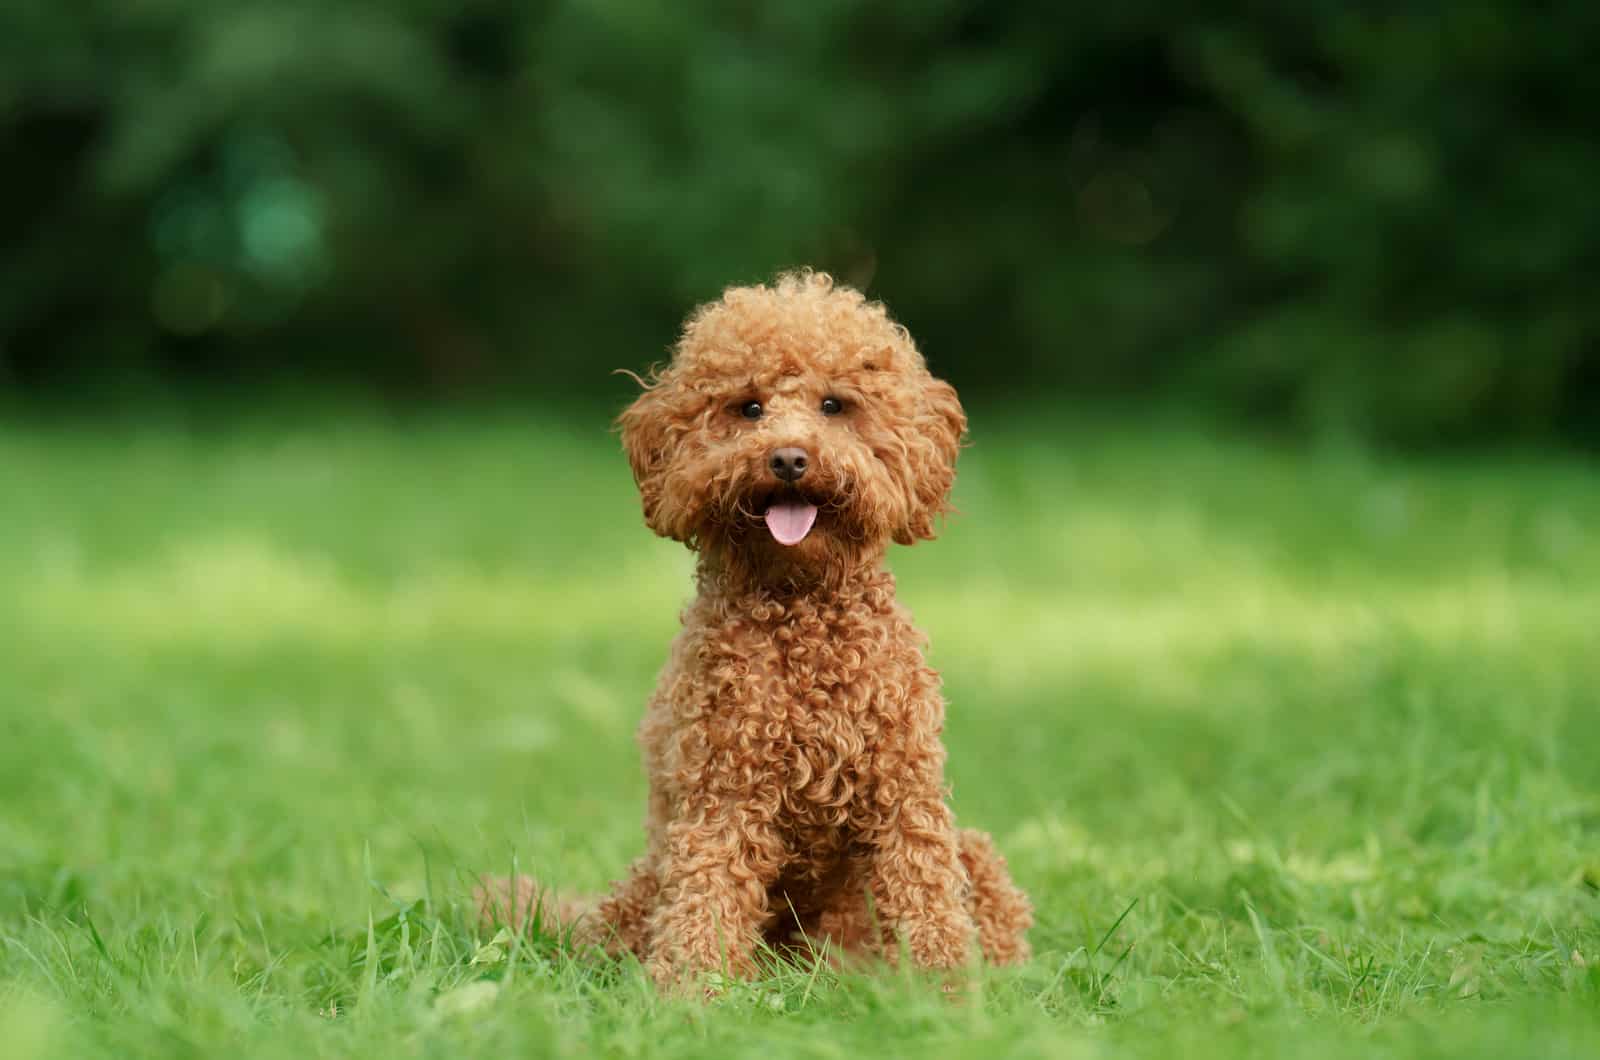 Toy Poodle is sitting on green grass